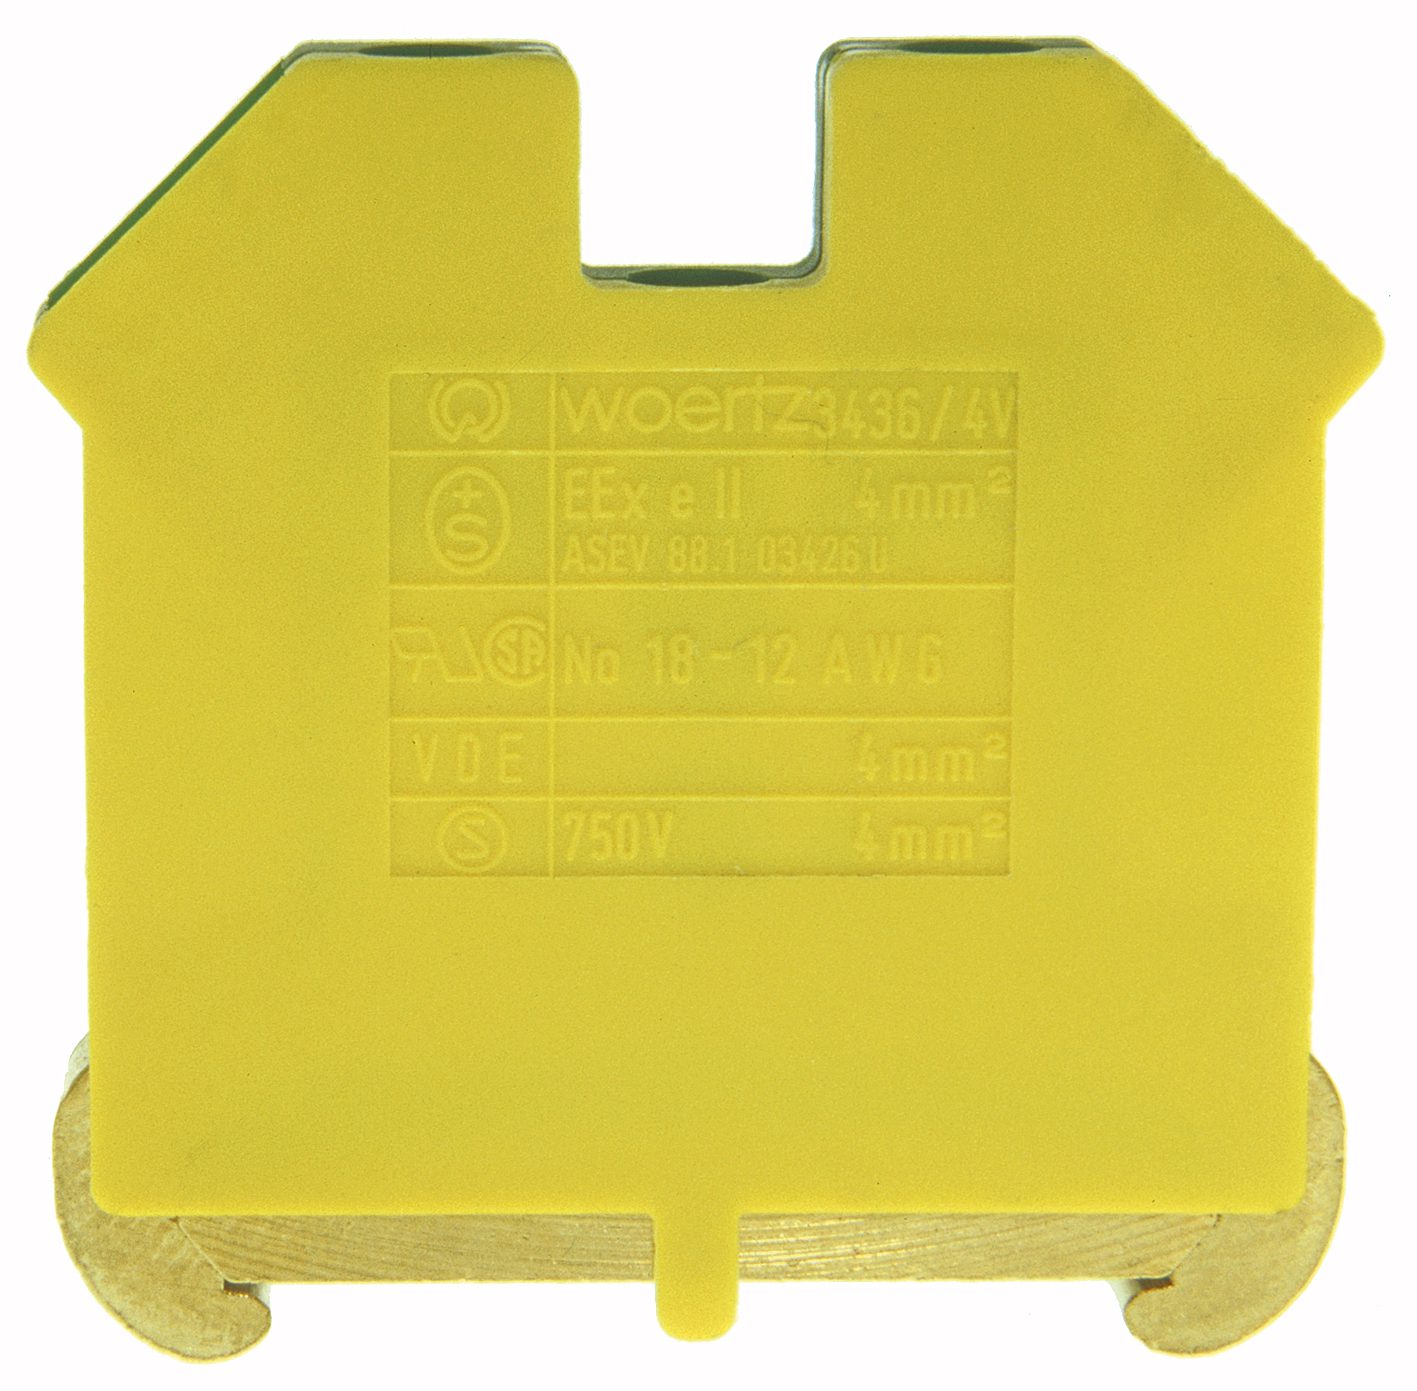 Protective conductor terminal DIN35 4mm² green/yellow